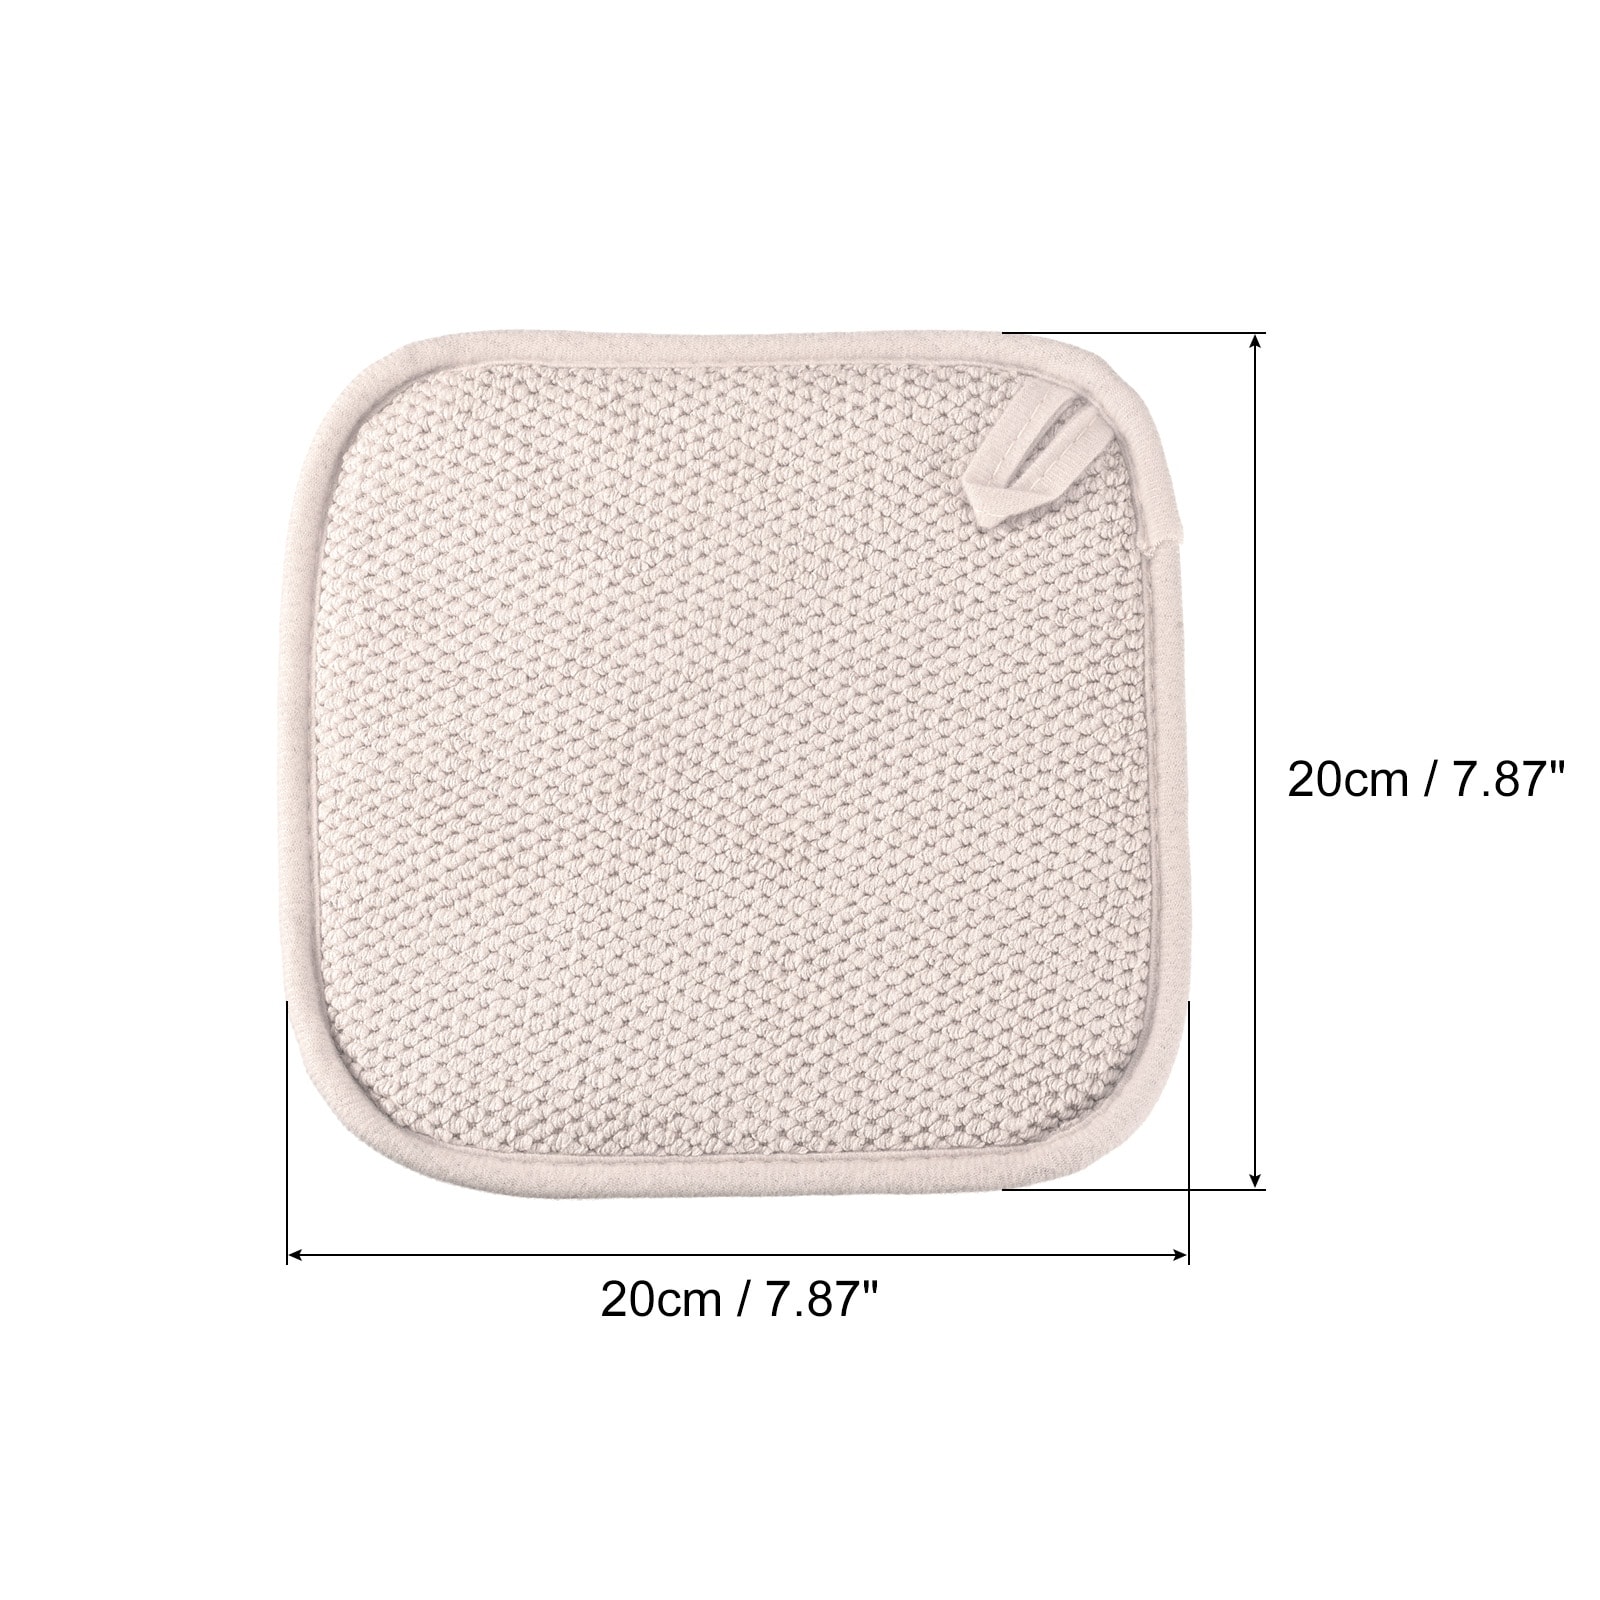 https://ak1.ostkcdn.com/images/products/is/images/direct/33dffaa8b648590c2405c9ecaf235b4d5dde89df/2pcs-Dish-Drying-Mat-Microfiber-Dishes-Drainer-Mats-Dish-Drying-Pad-Red.jpg